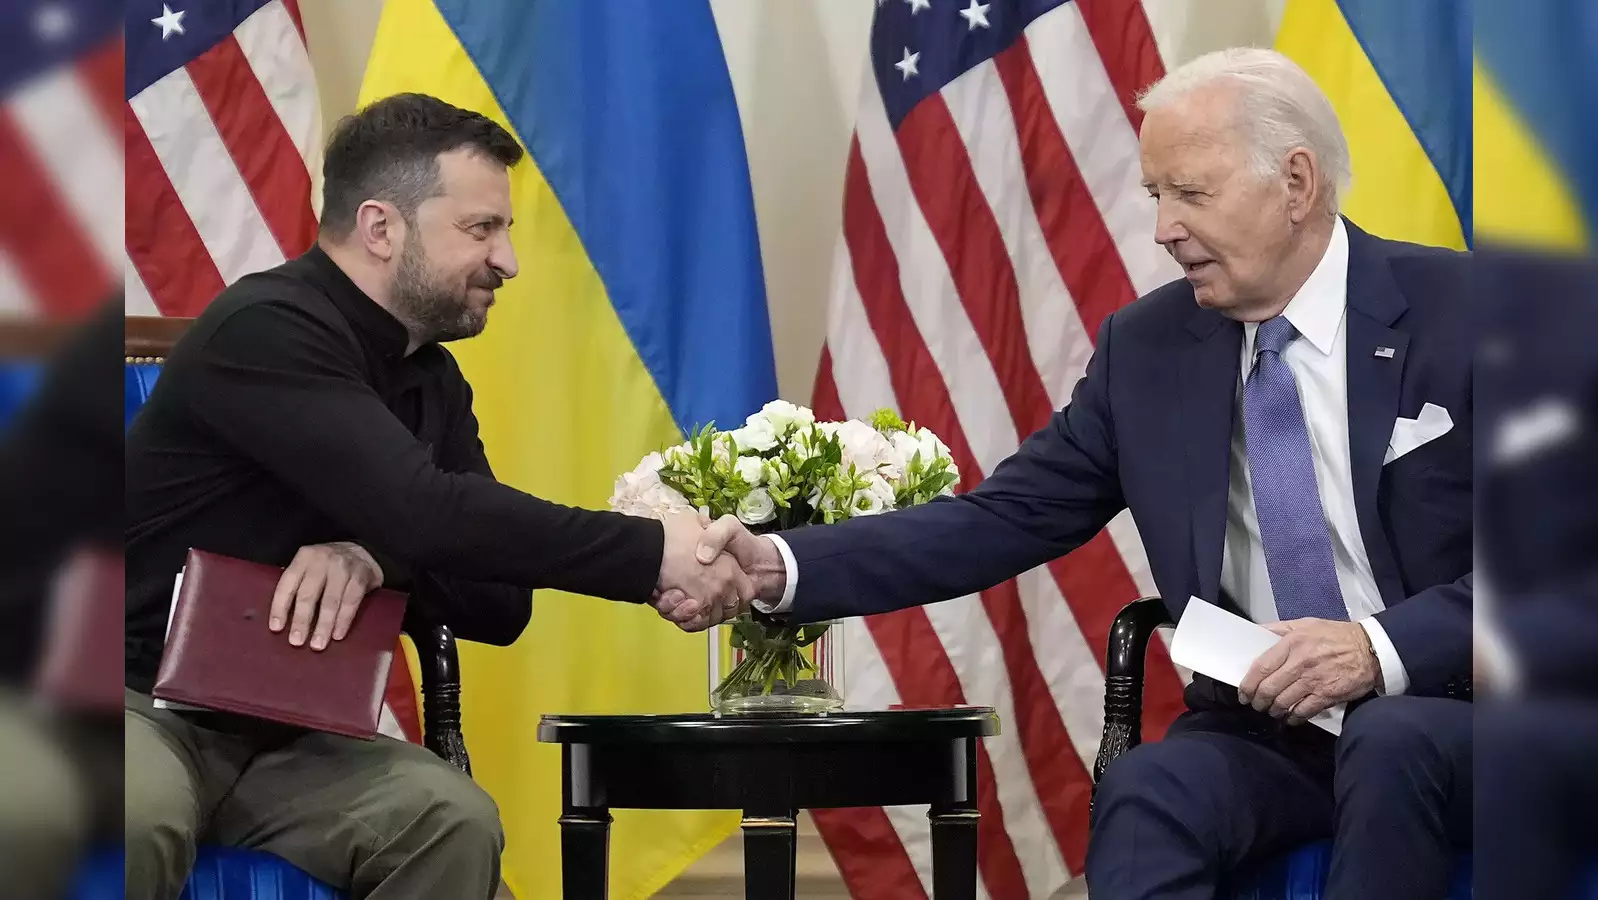 US President Biden Apologizes to Zelenskyy Over Delay in Passing Aid Package to Ukraine